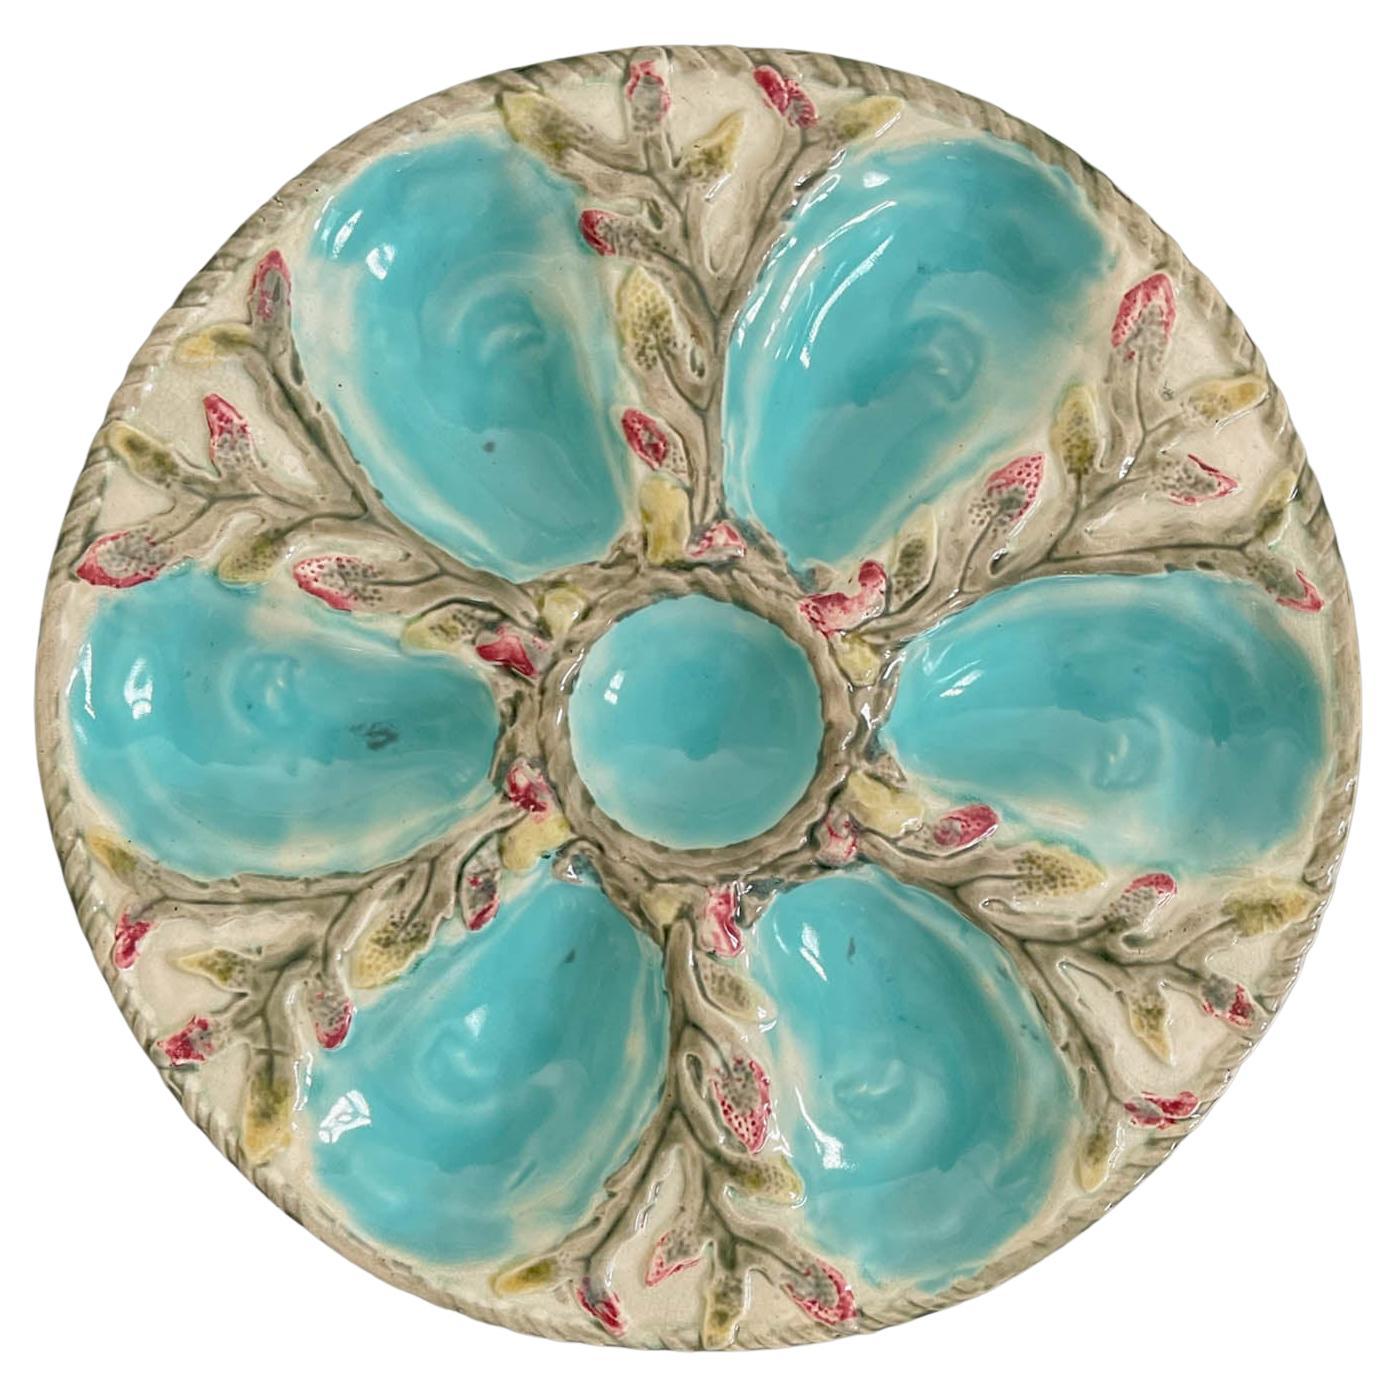 19th C. English Majolica Fielding Oyster Plate